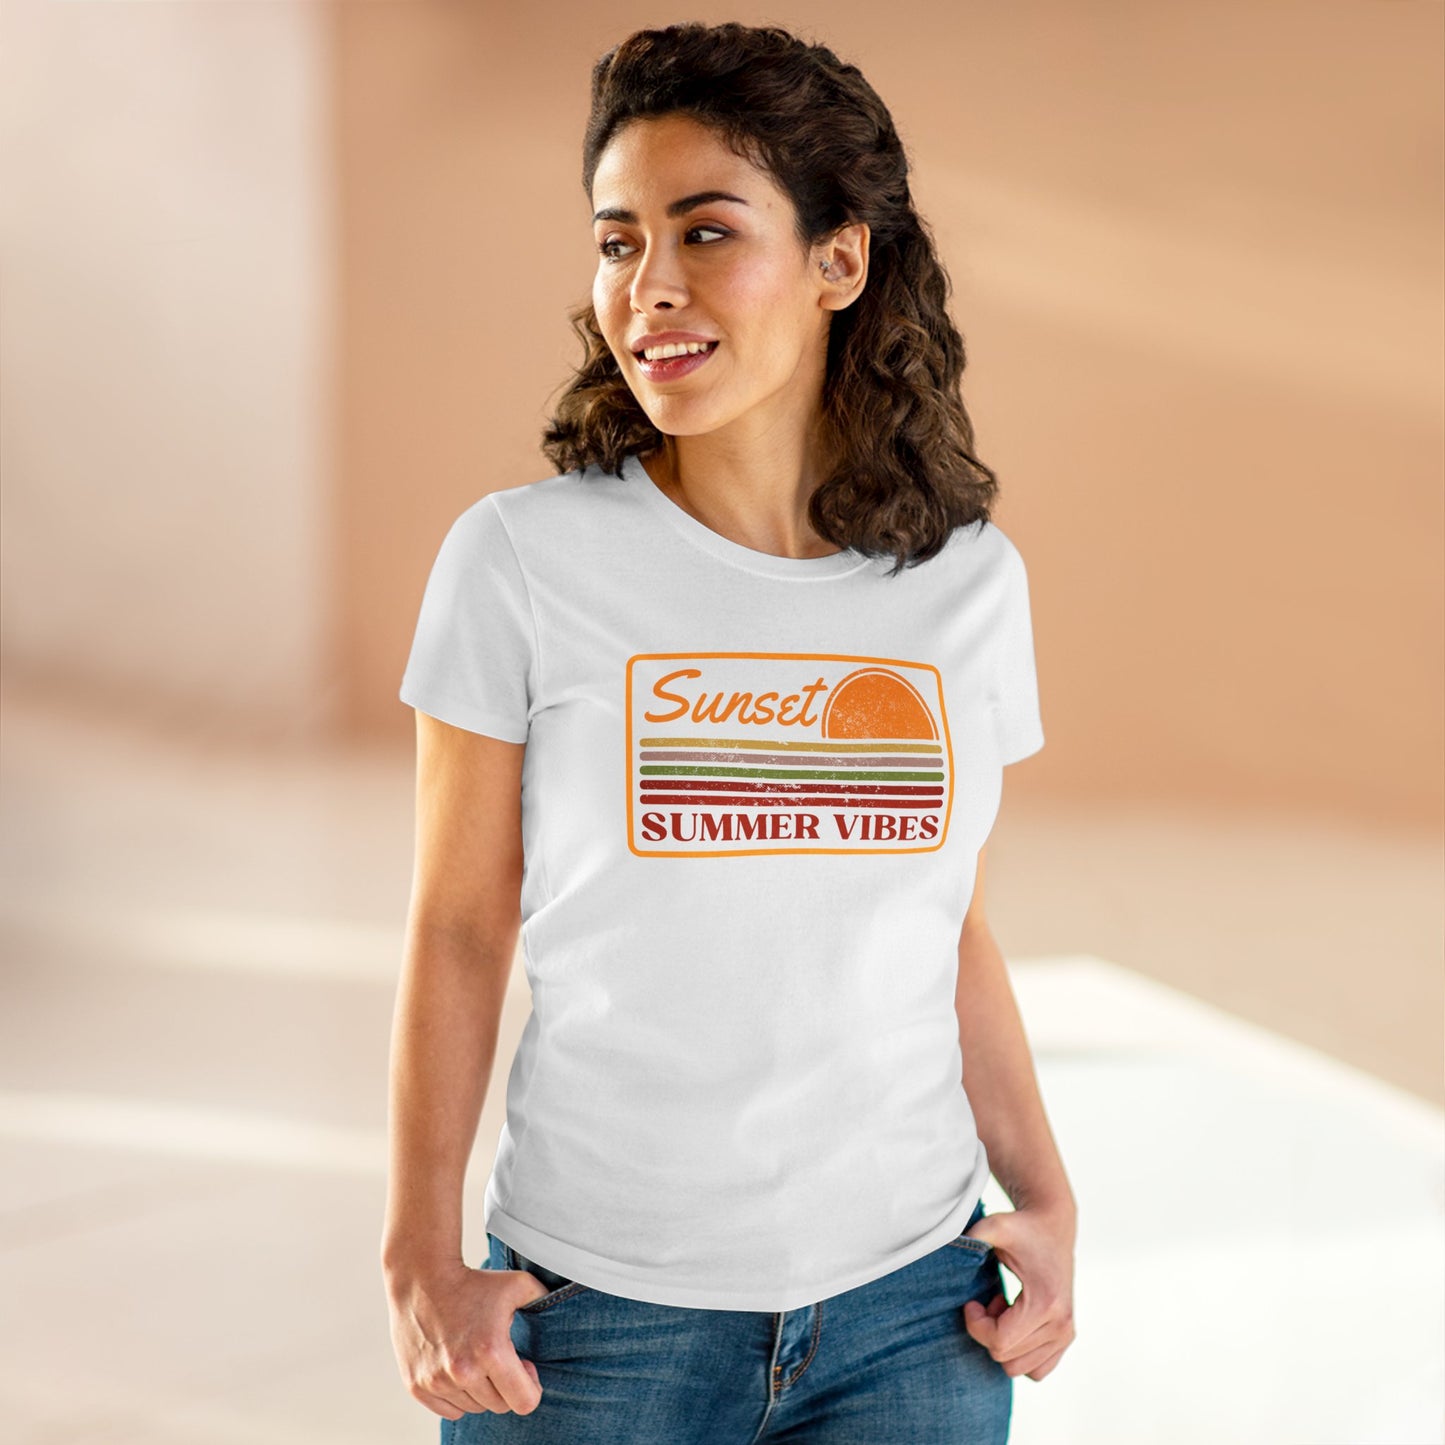 Summer Vibes Women's Beach T-Shirt - 100% Cotton, Semi-Fitted, Soft and Comfy